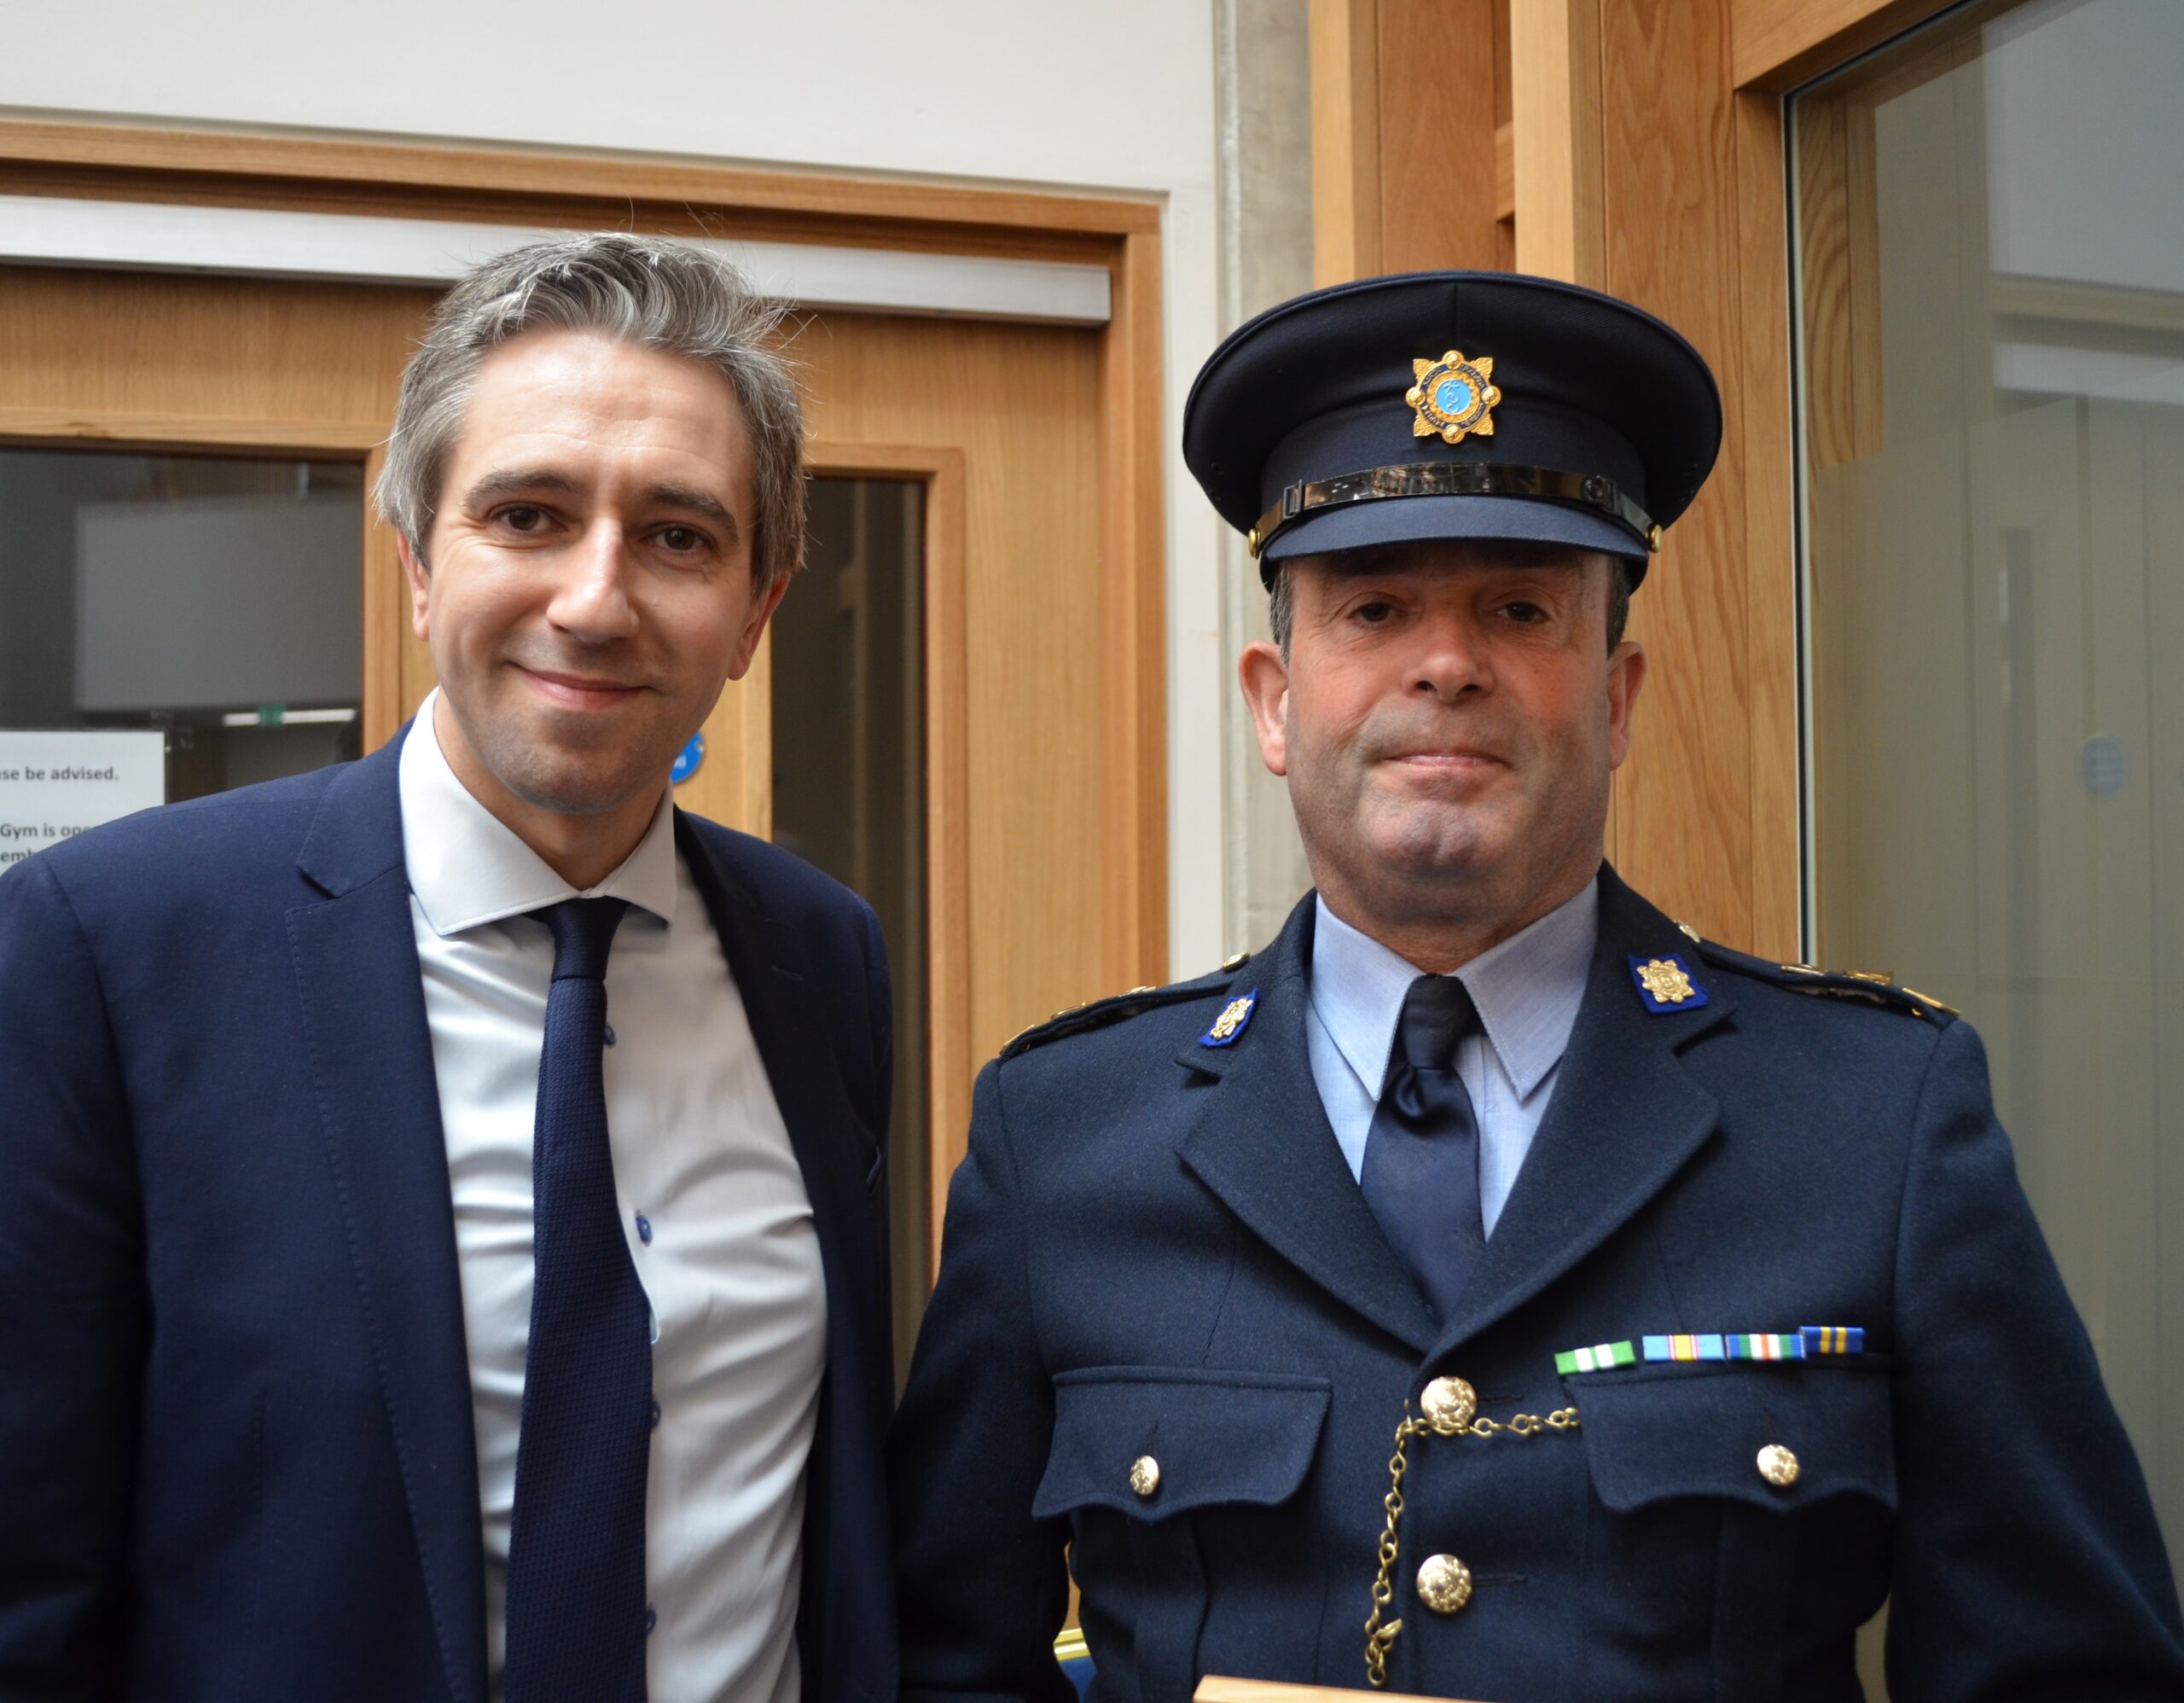 Donegal Garda Sergeant Honoured with Silver Scott Medal